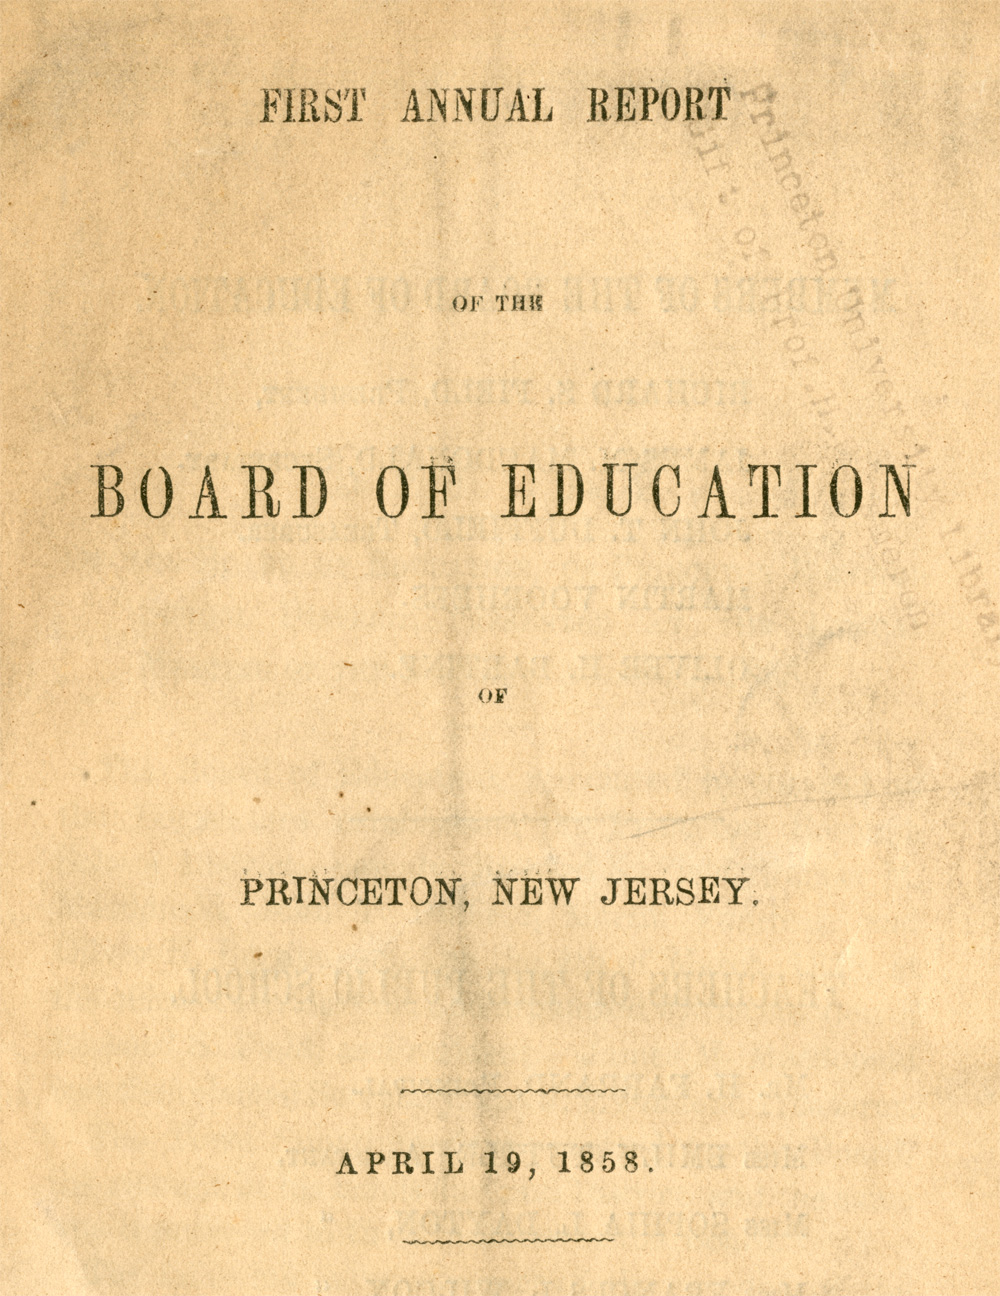 First Annual Report of the Princeton Borough Board of Education, 1858. Historical Society of Princeton.